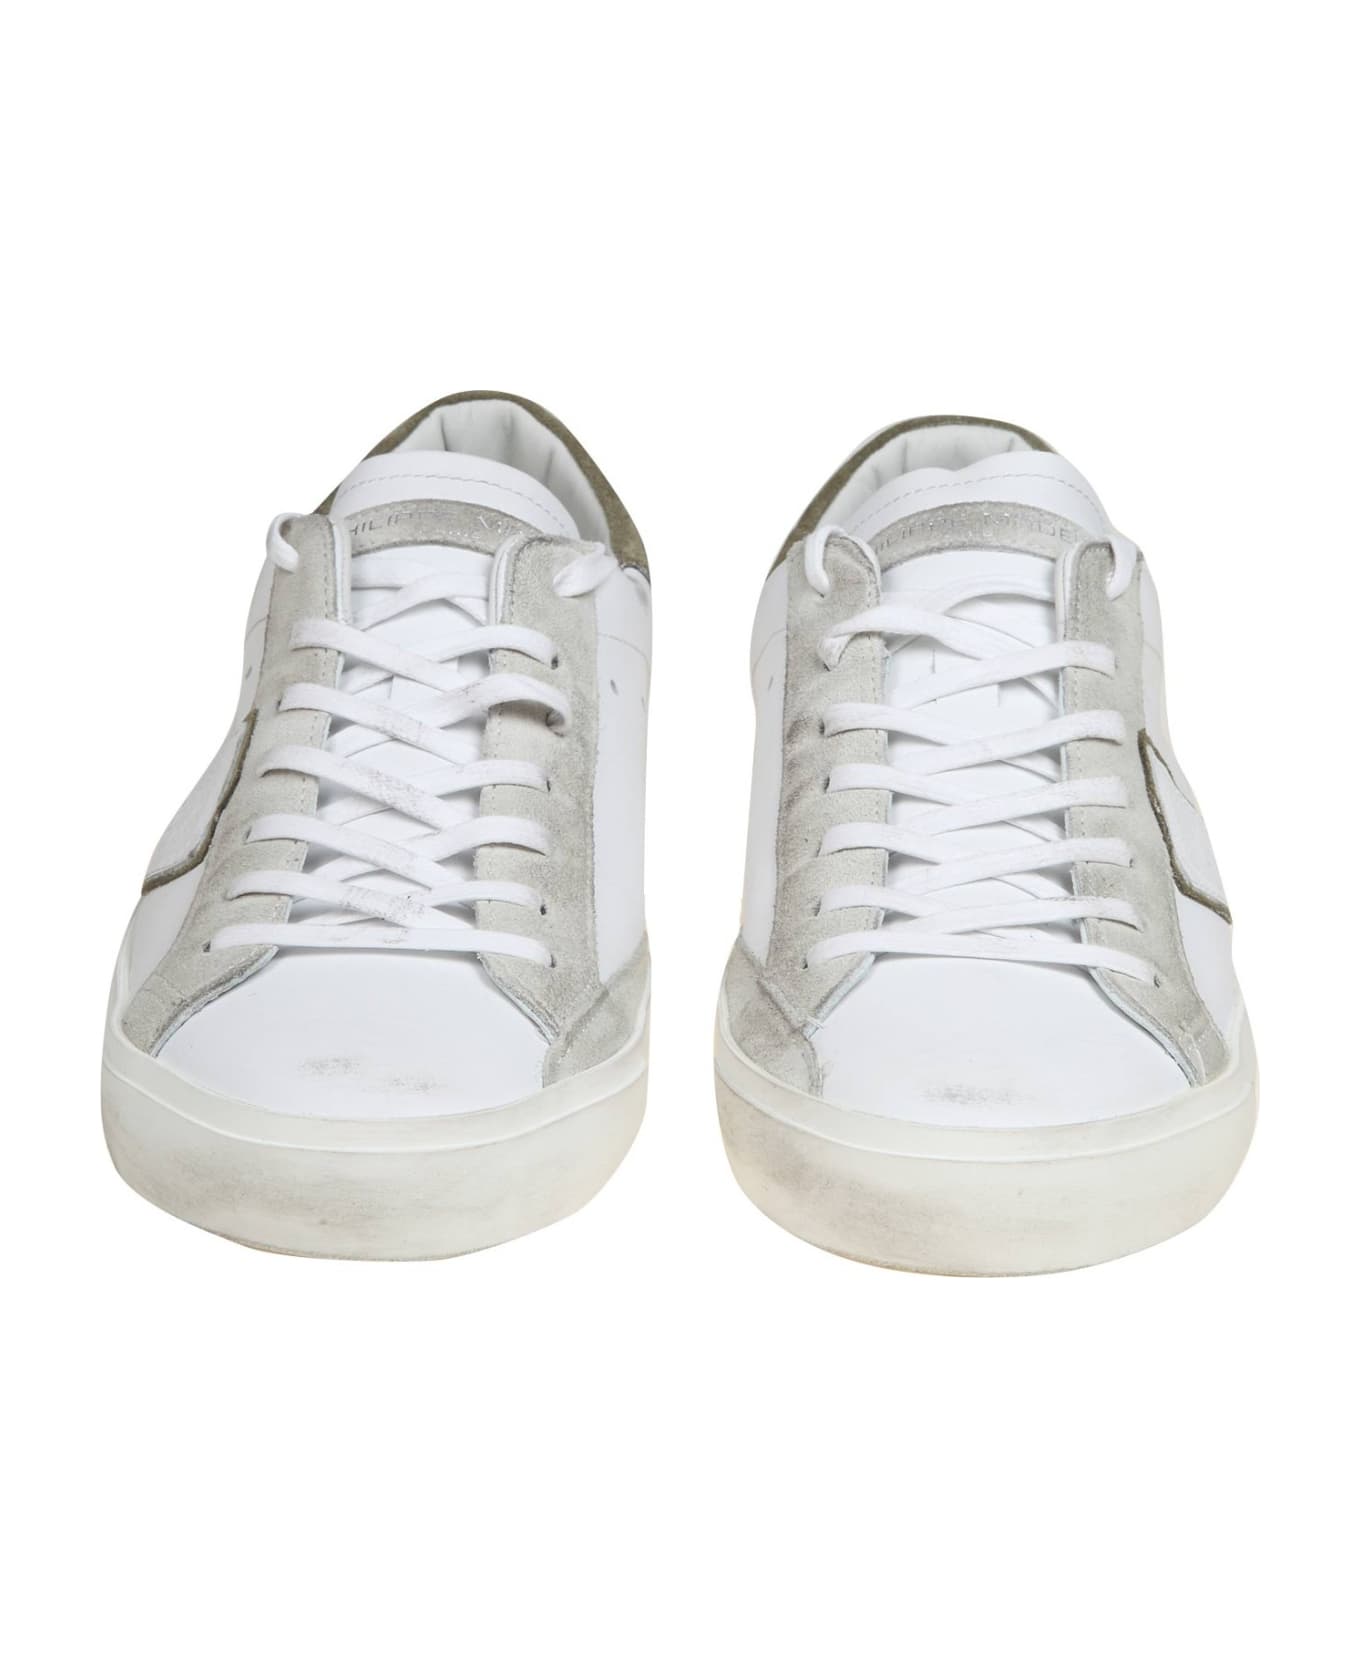 Philippe Model Prsx Sneakers In White And Green Leather - White green